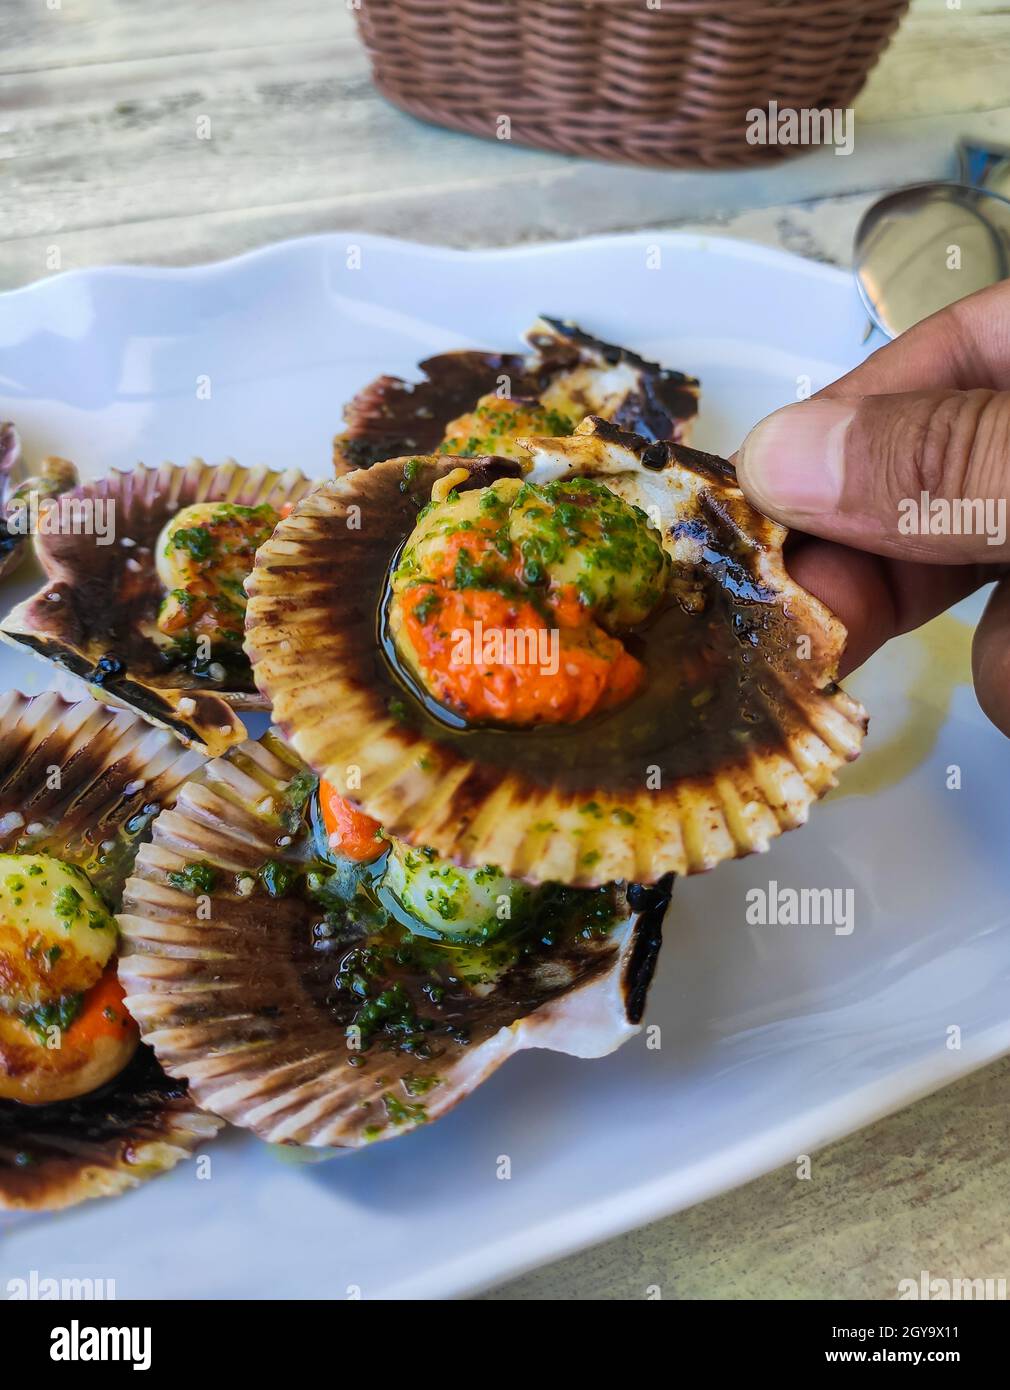 Hand holding scallops in restaurant ready to eat Stock Photo